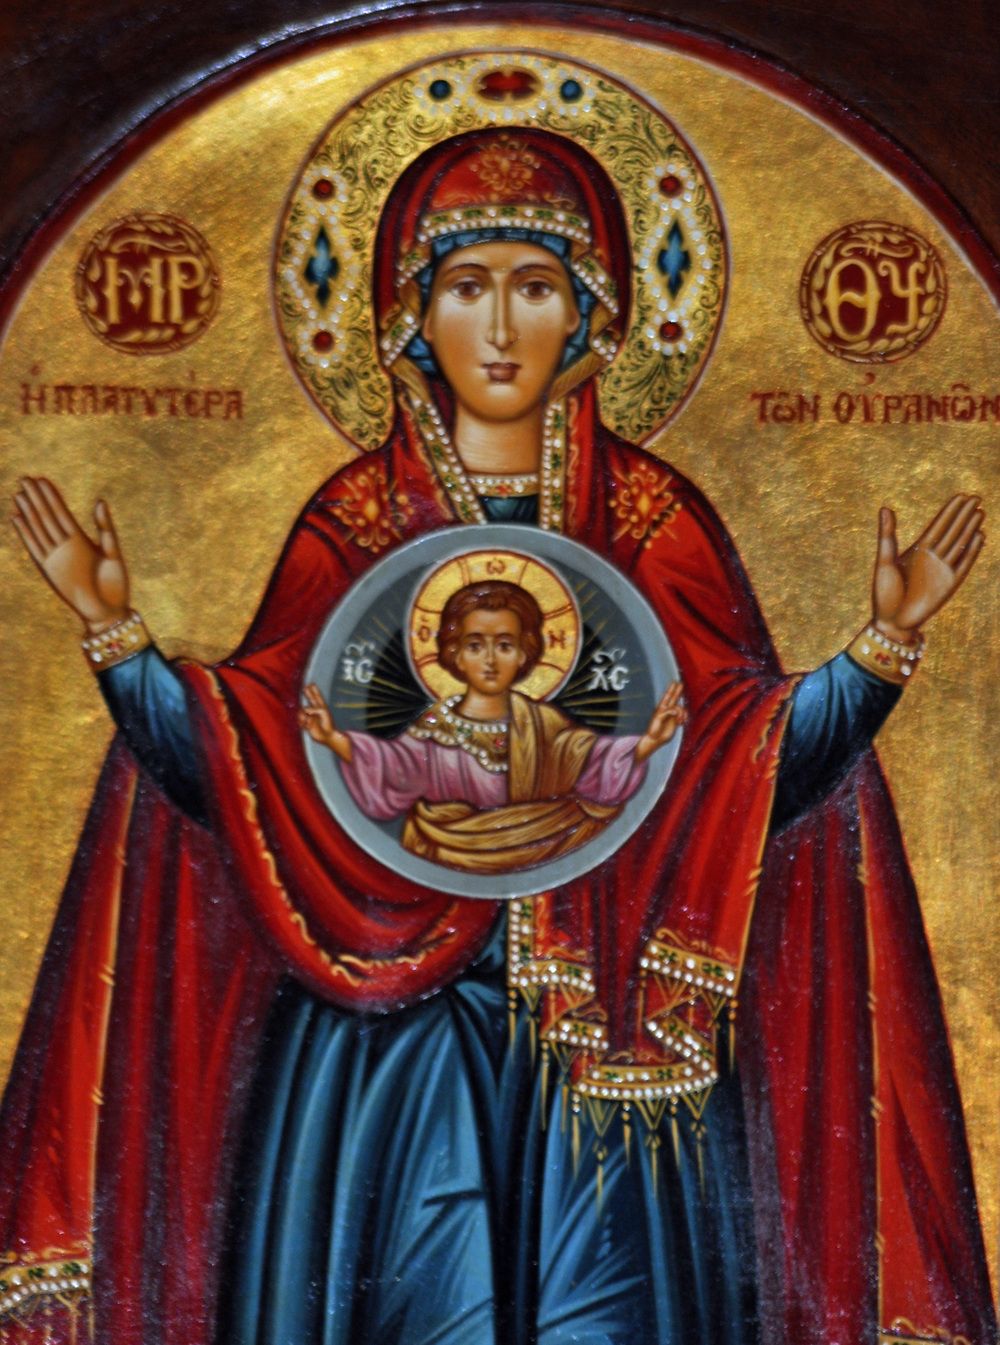 Meeting the Theotokos in the Hospital